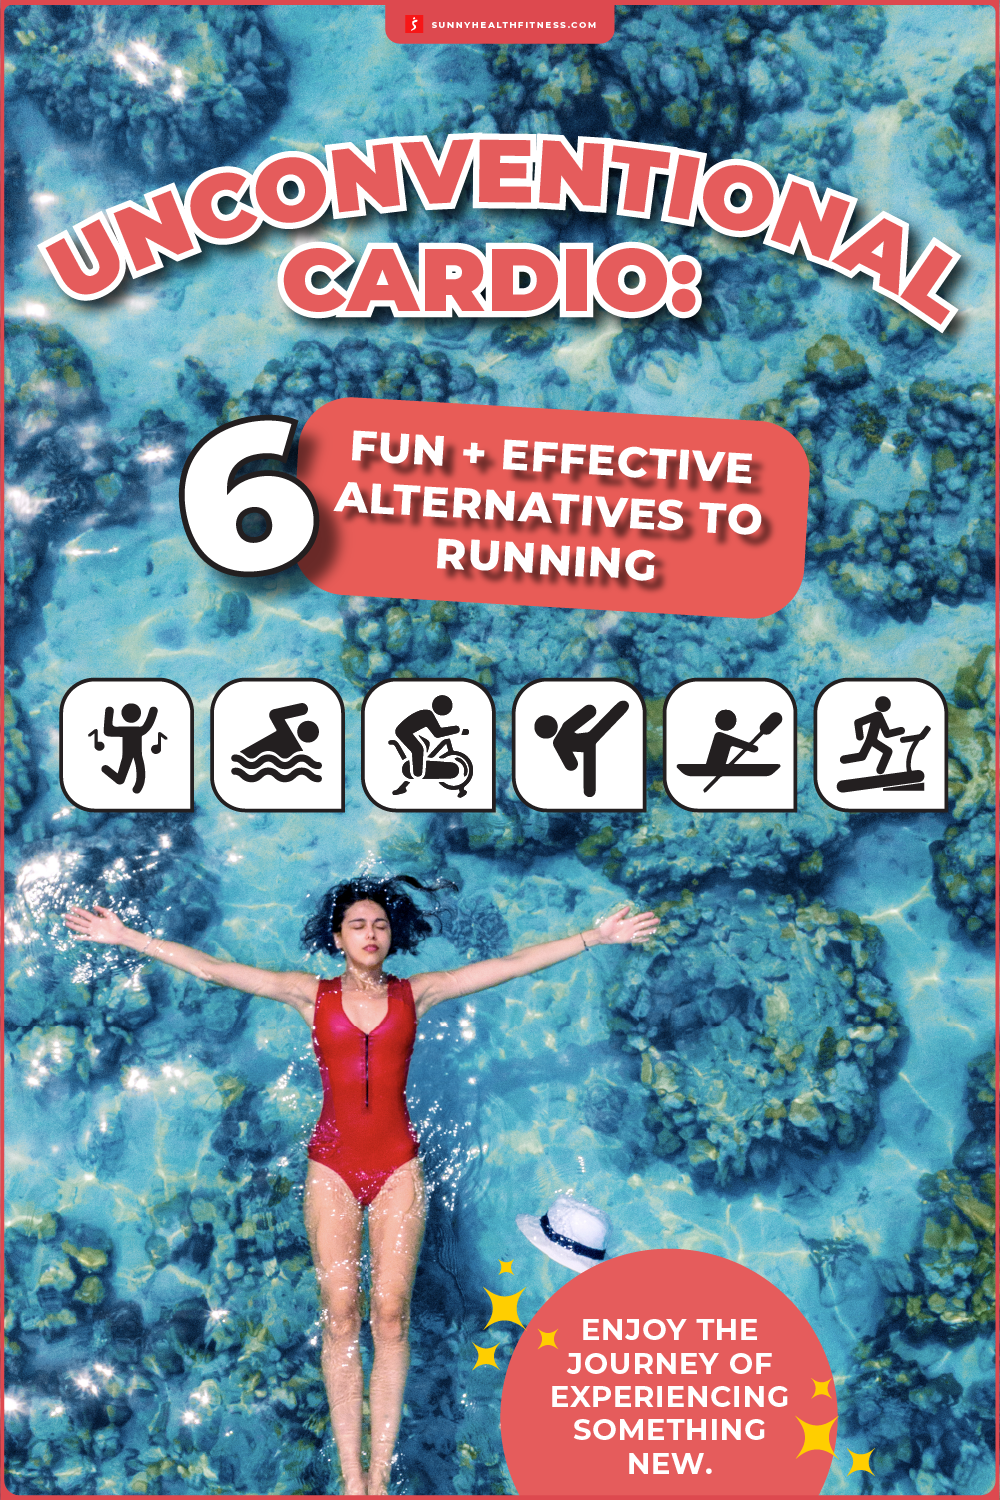 6 Fun and Effective Alternatives to Running Infographic